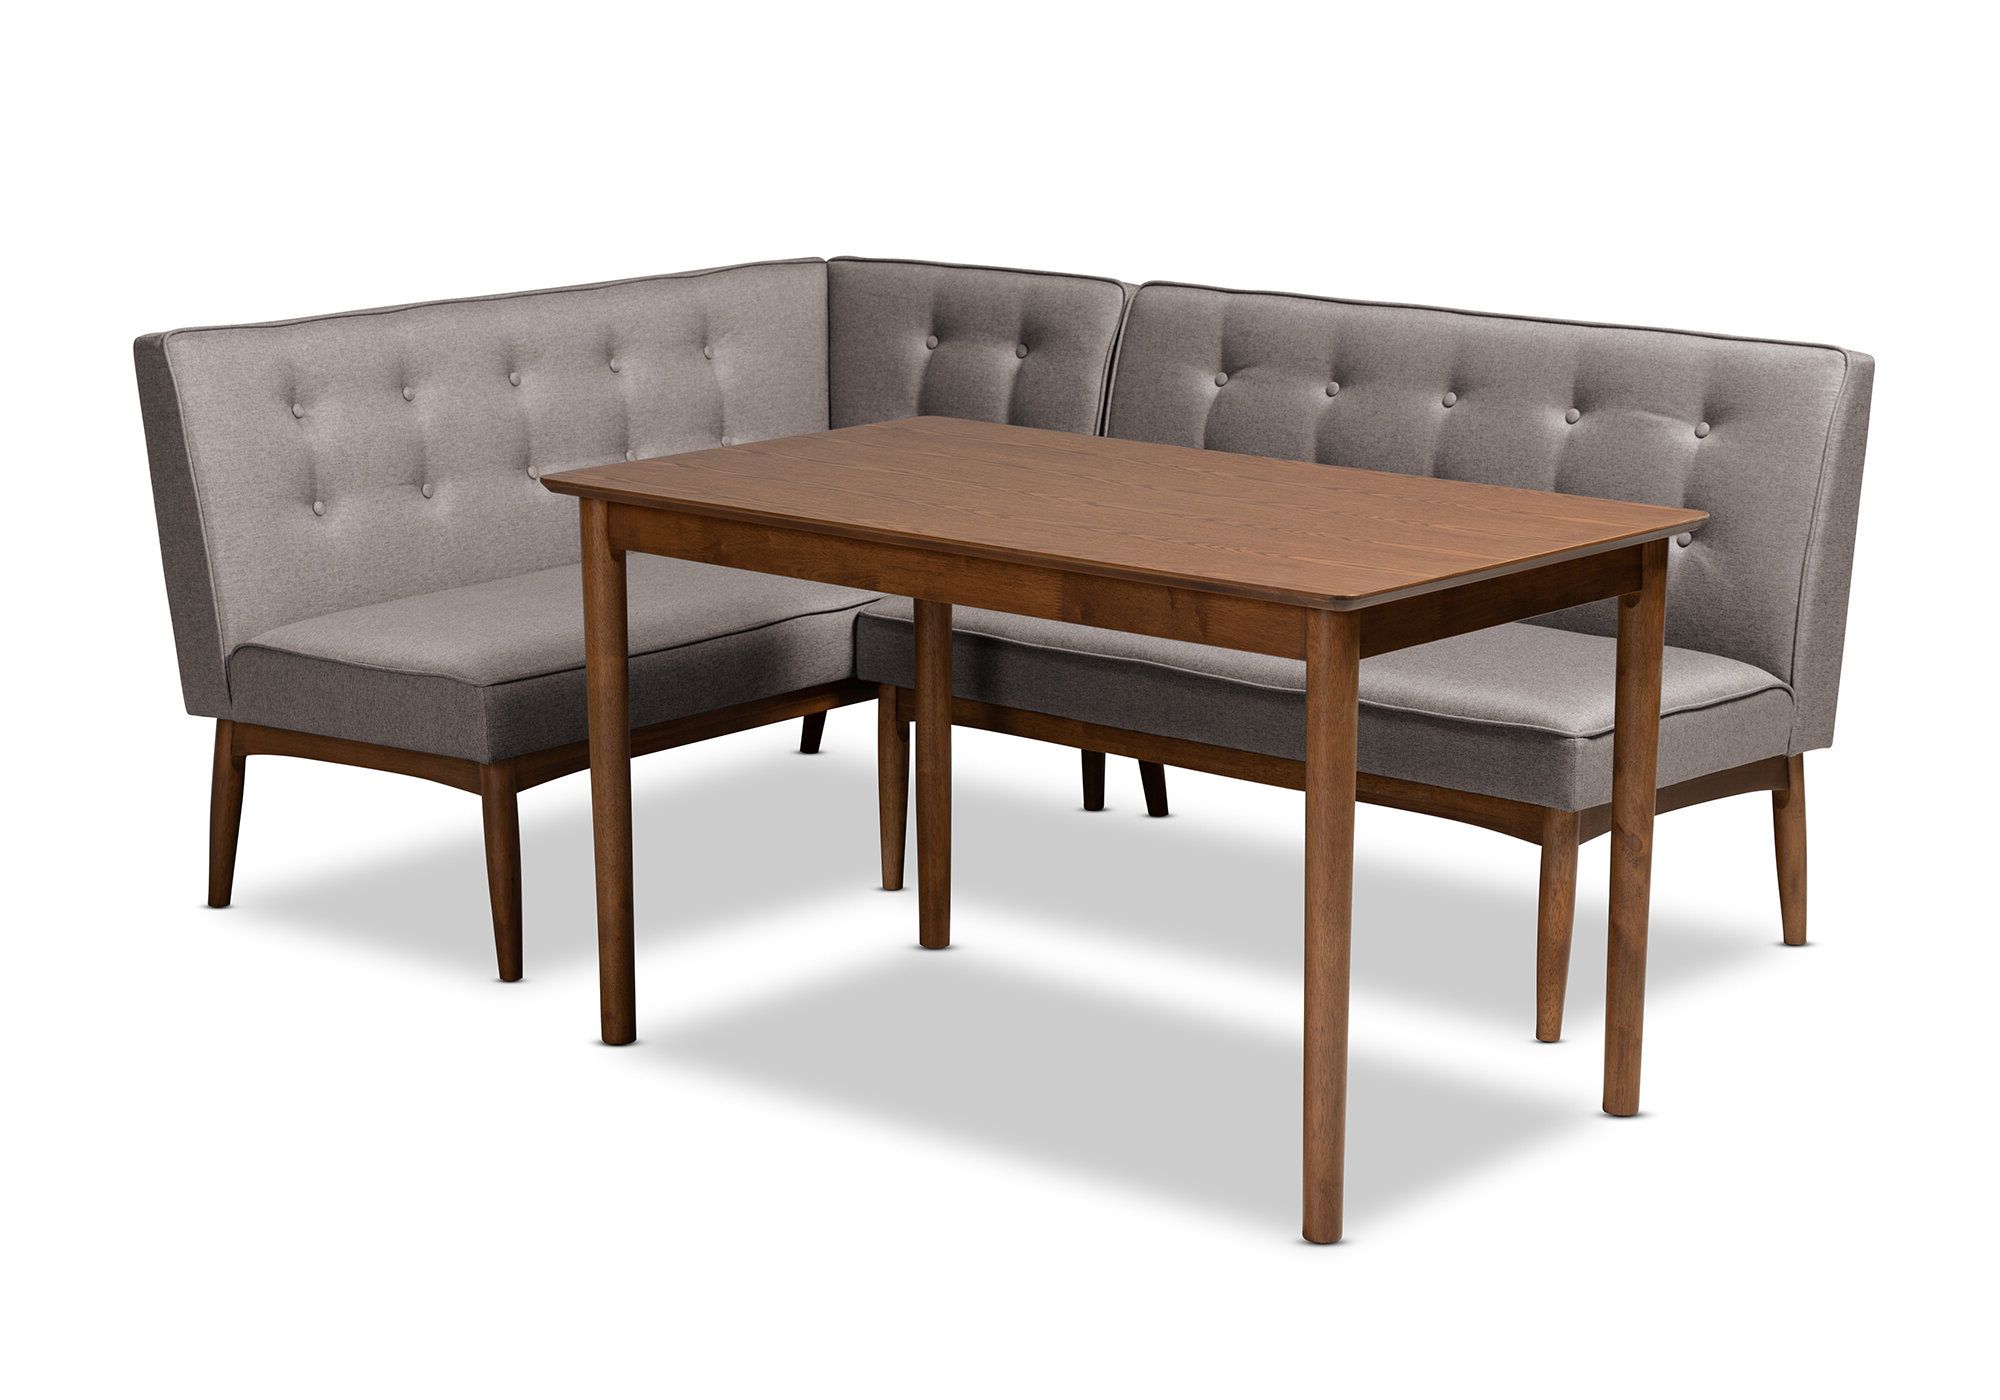 Bopp Mid Century Modern Upholstered 3 Piece Breakfast Nook Dining Set Throughout Mid Century Modern 47 Inch Cappuccino Buffets (View 15 of 20)